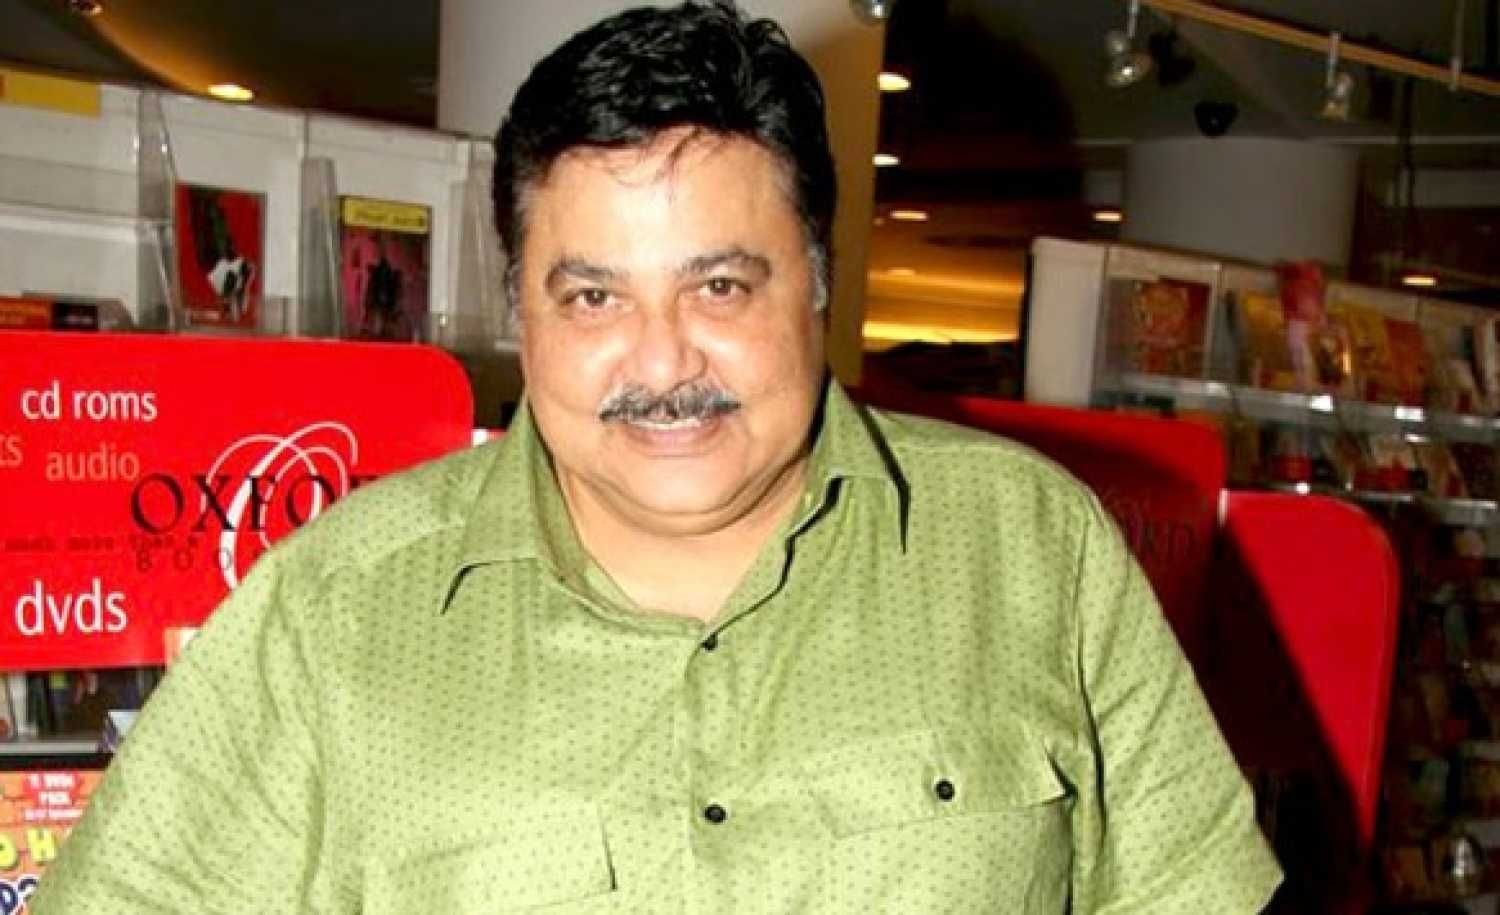 Sarabhai Vs Sarabhai Star Satish Shah Reveals He Tested Positive For COVID-19 In July; Says ‘I Am Absolutely Well Now’